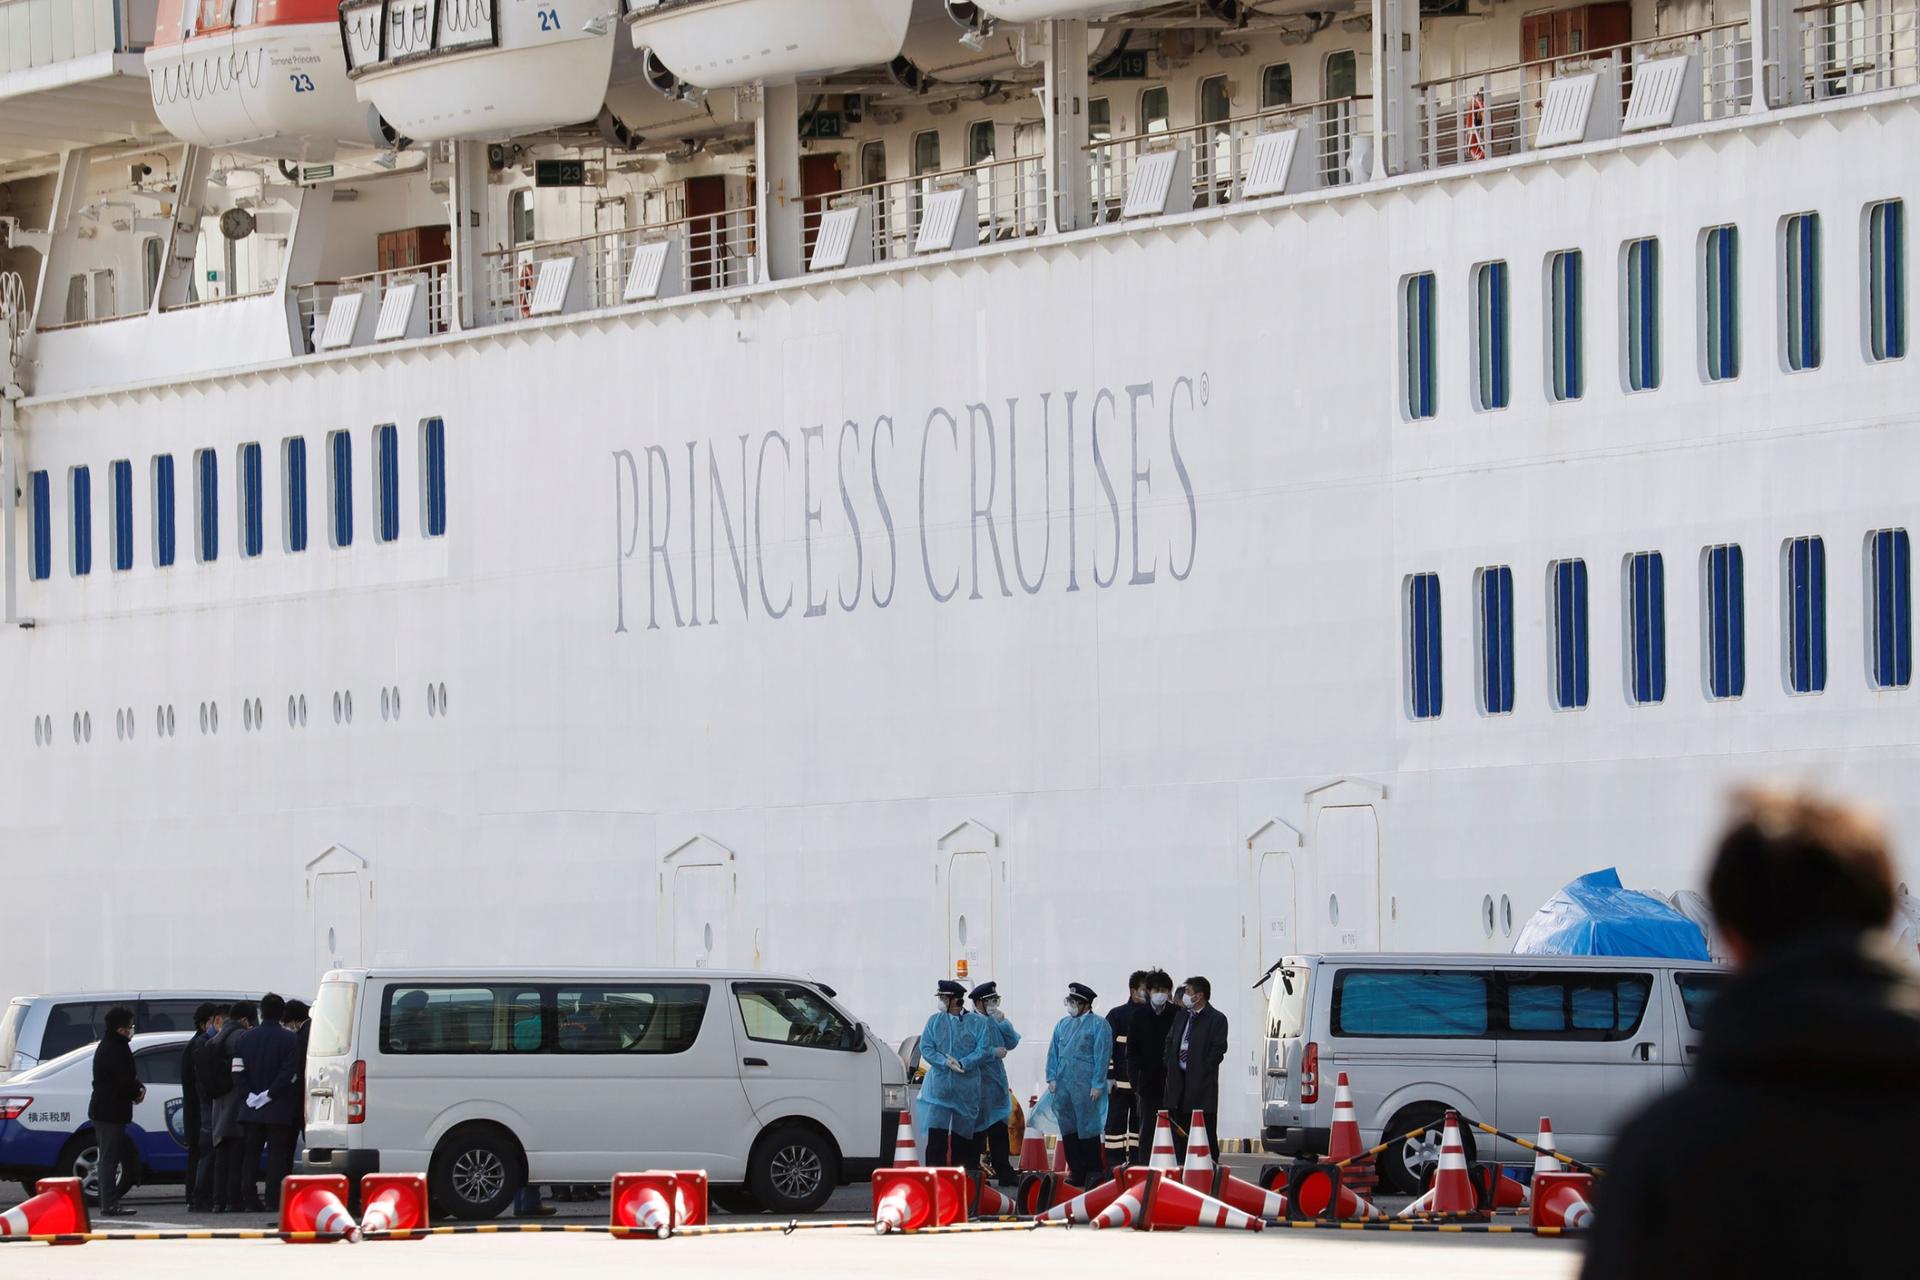 Several vans are shown parked next to a cruise ship with personnel wearing masks stand nearby, 